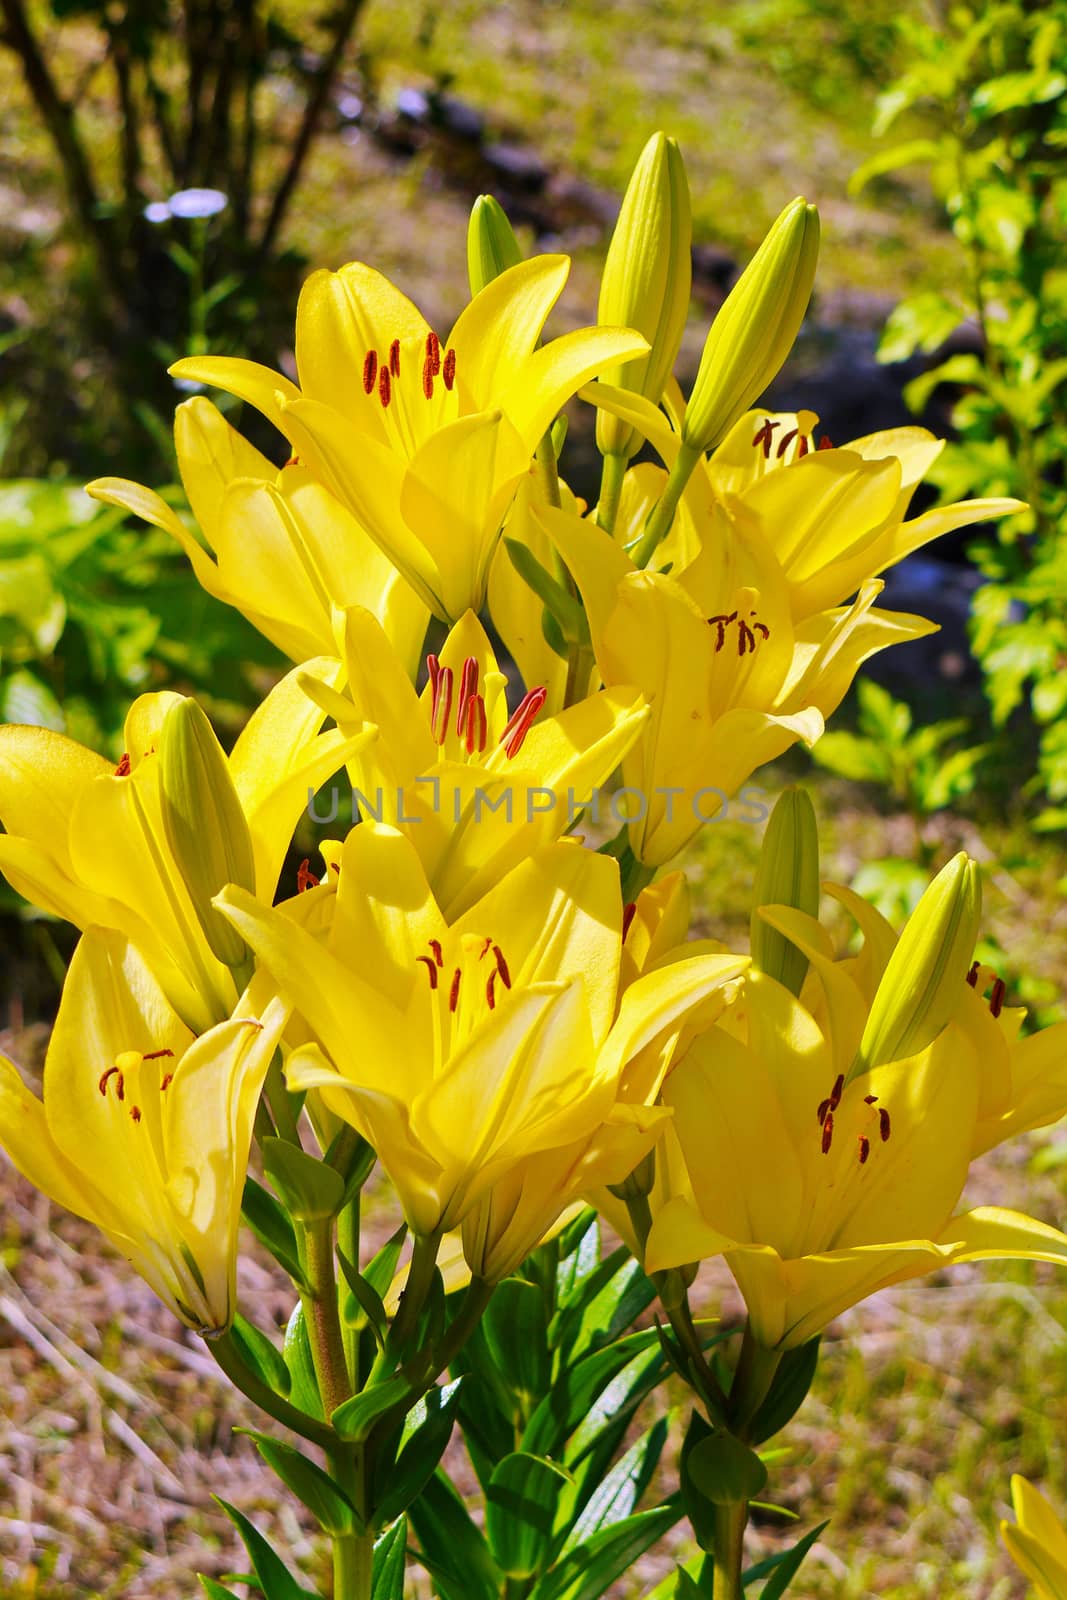 Several stems of beautiful, yellow lilies form a natural green, blooming bouquet by Adamchuk